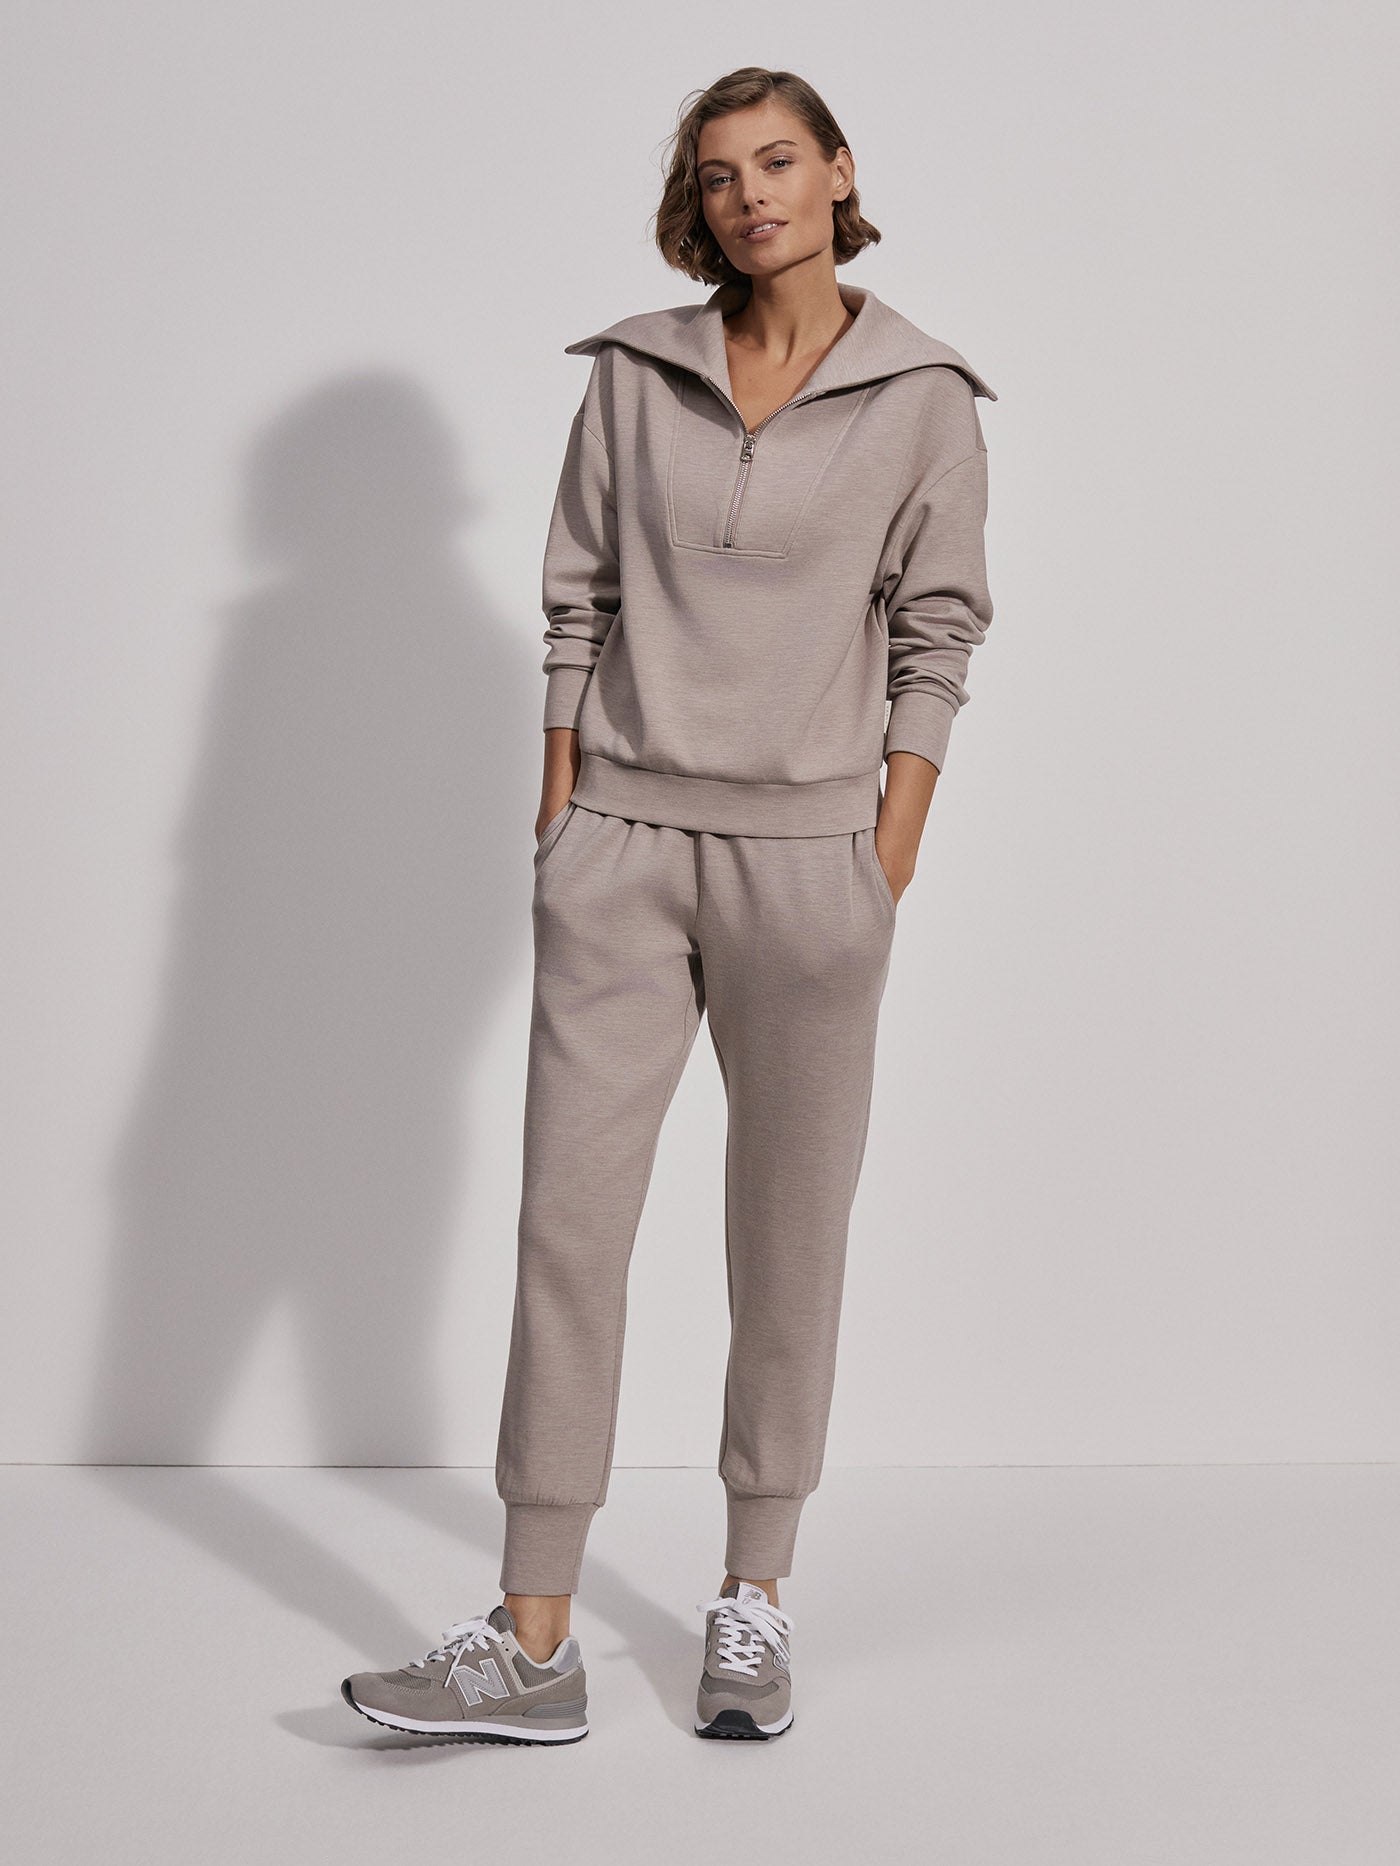 Varley - Custer Relaxed Sweatpants - Taupe Marl – Eco & Active